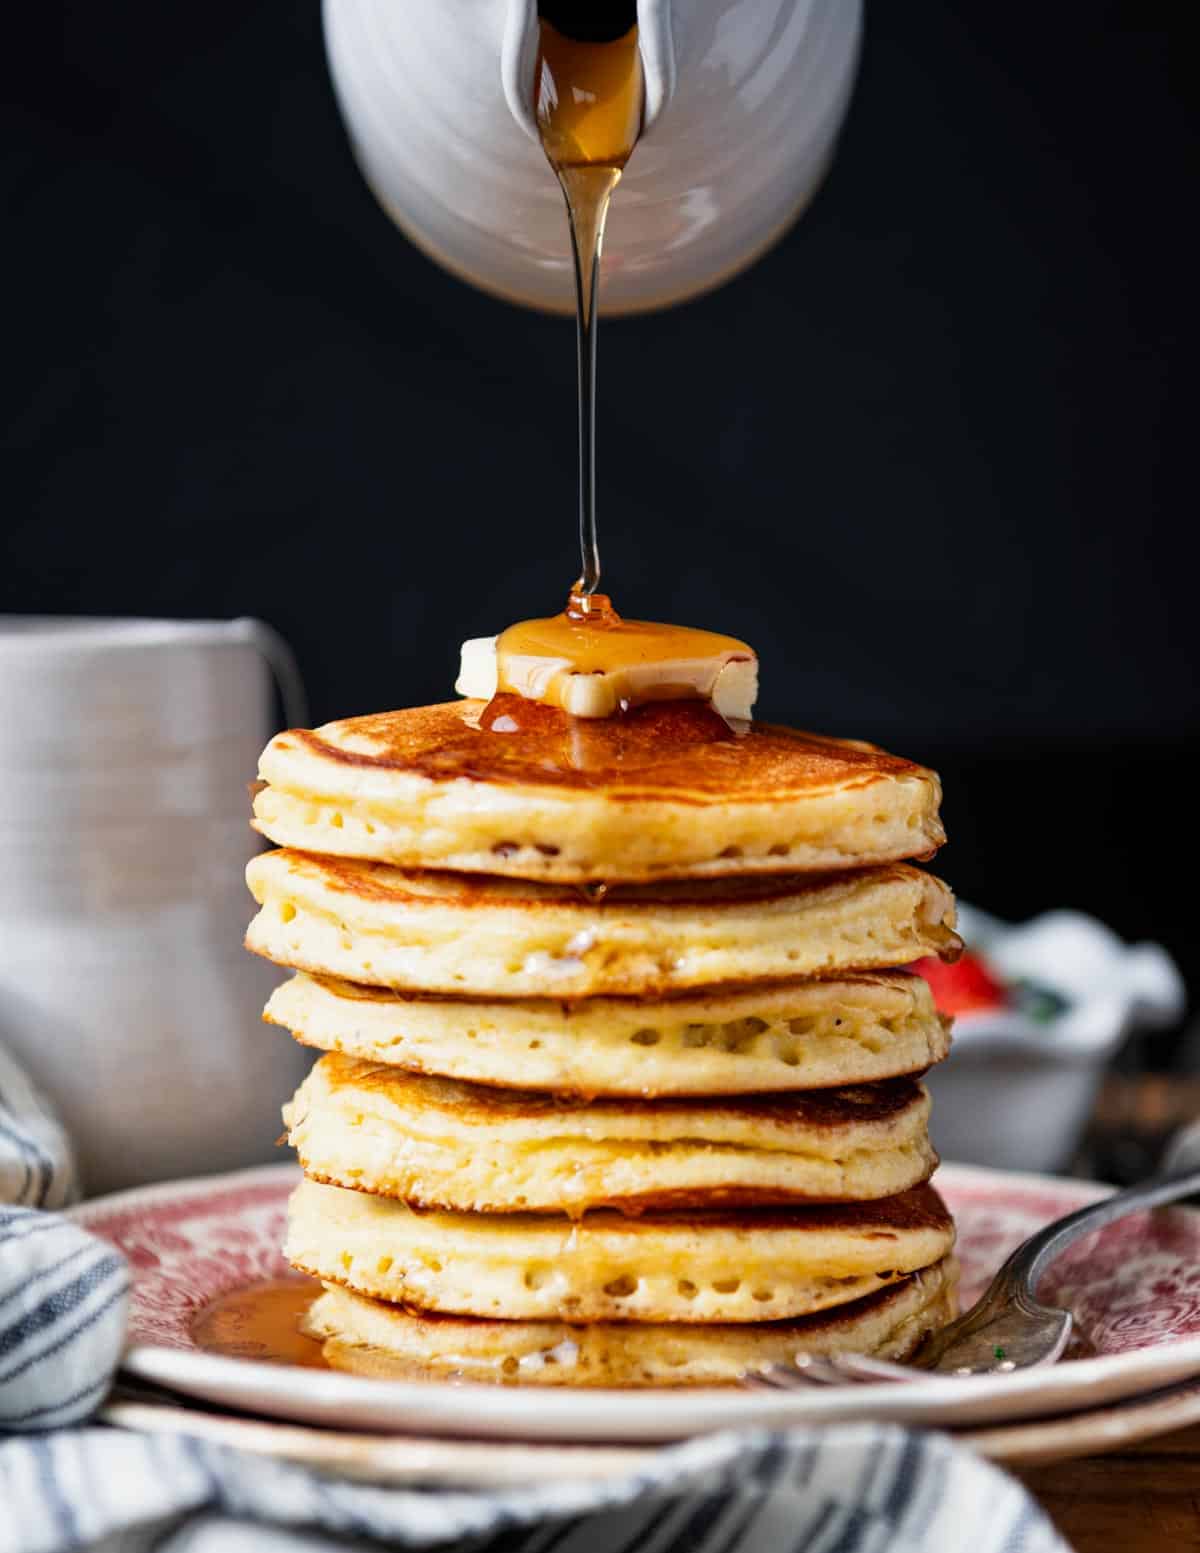 Pouring syrup over a stack of Jiffy cornmeal pancakes.